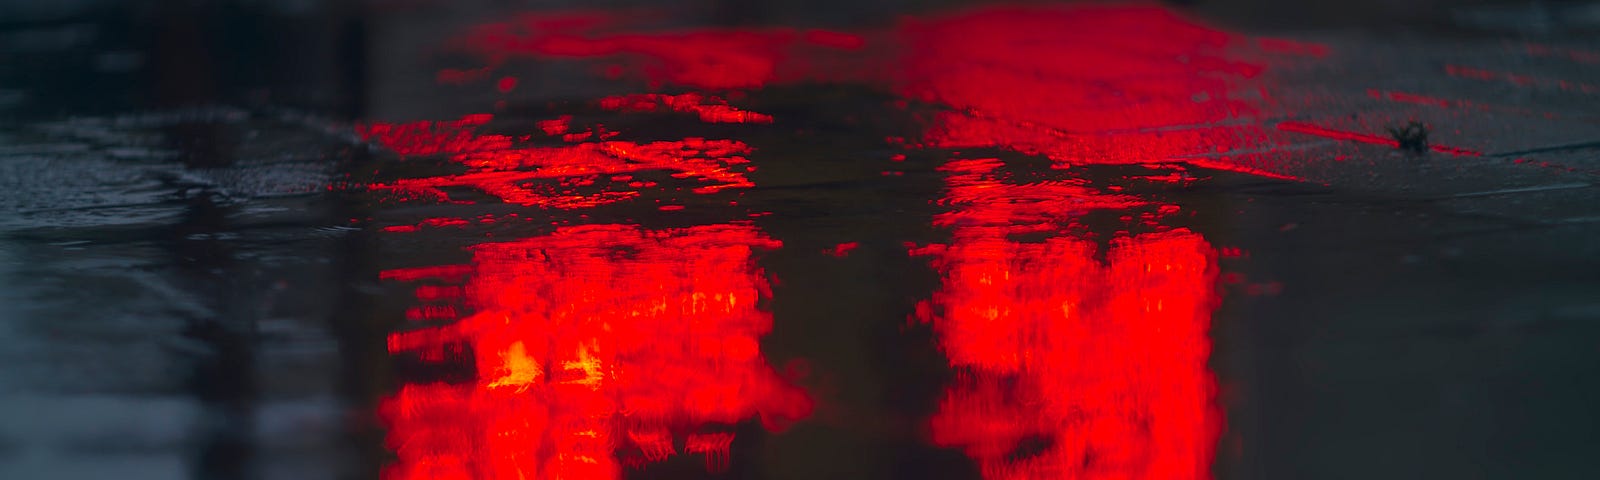 Rain puddle, bathed in red night light.